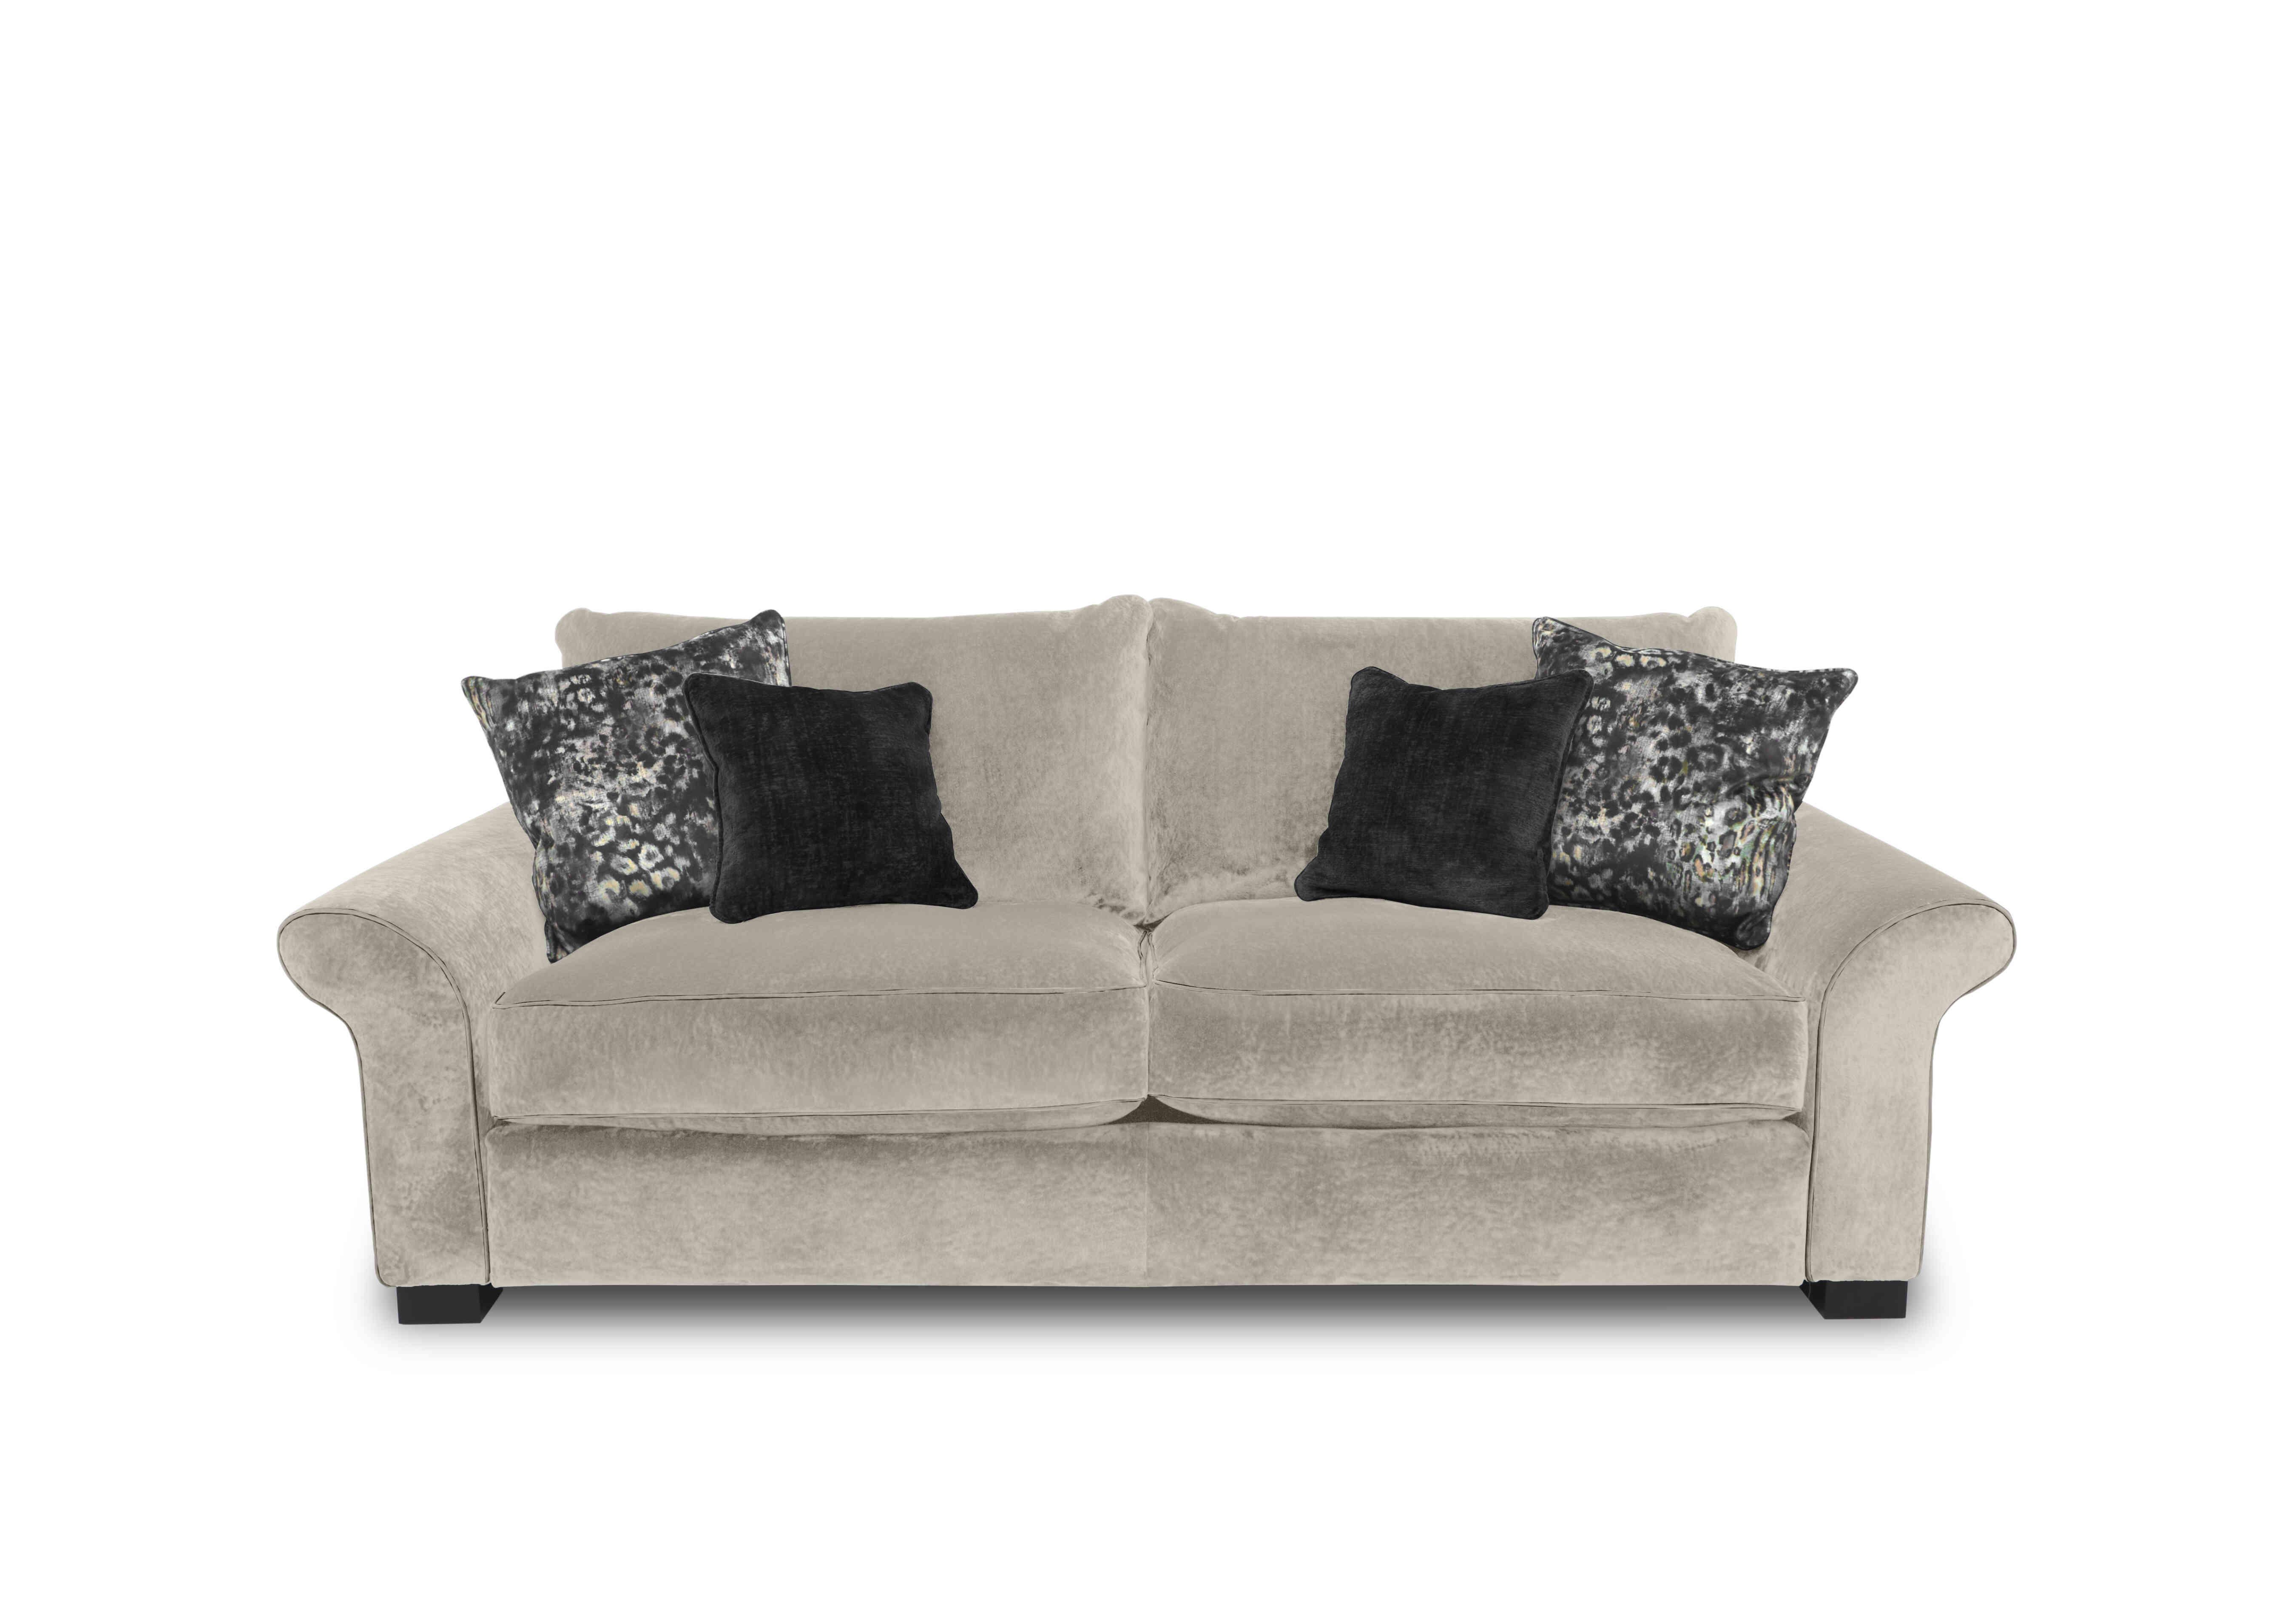 Modern Classics Hyde Park 3 Seater Sofa in Remini Oyster Sp Mf on Furniture Village